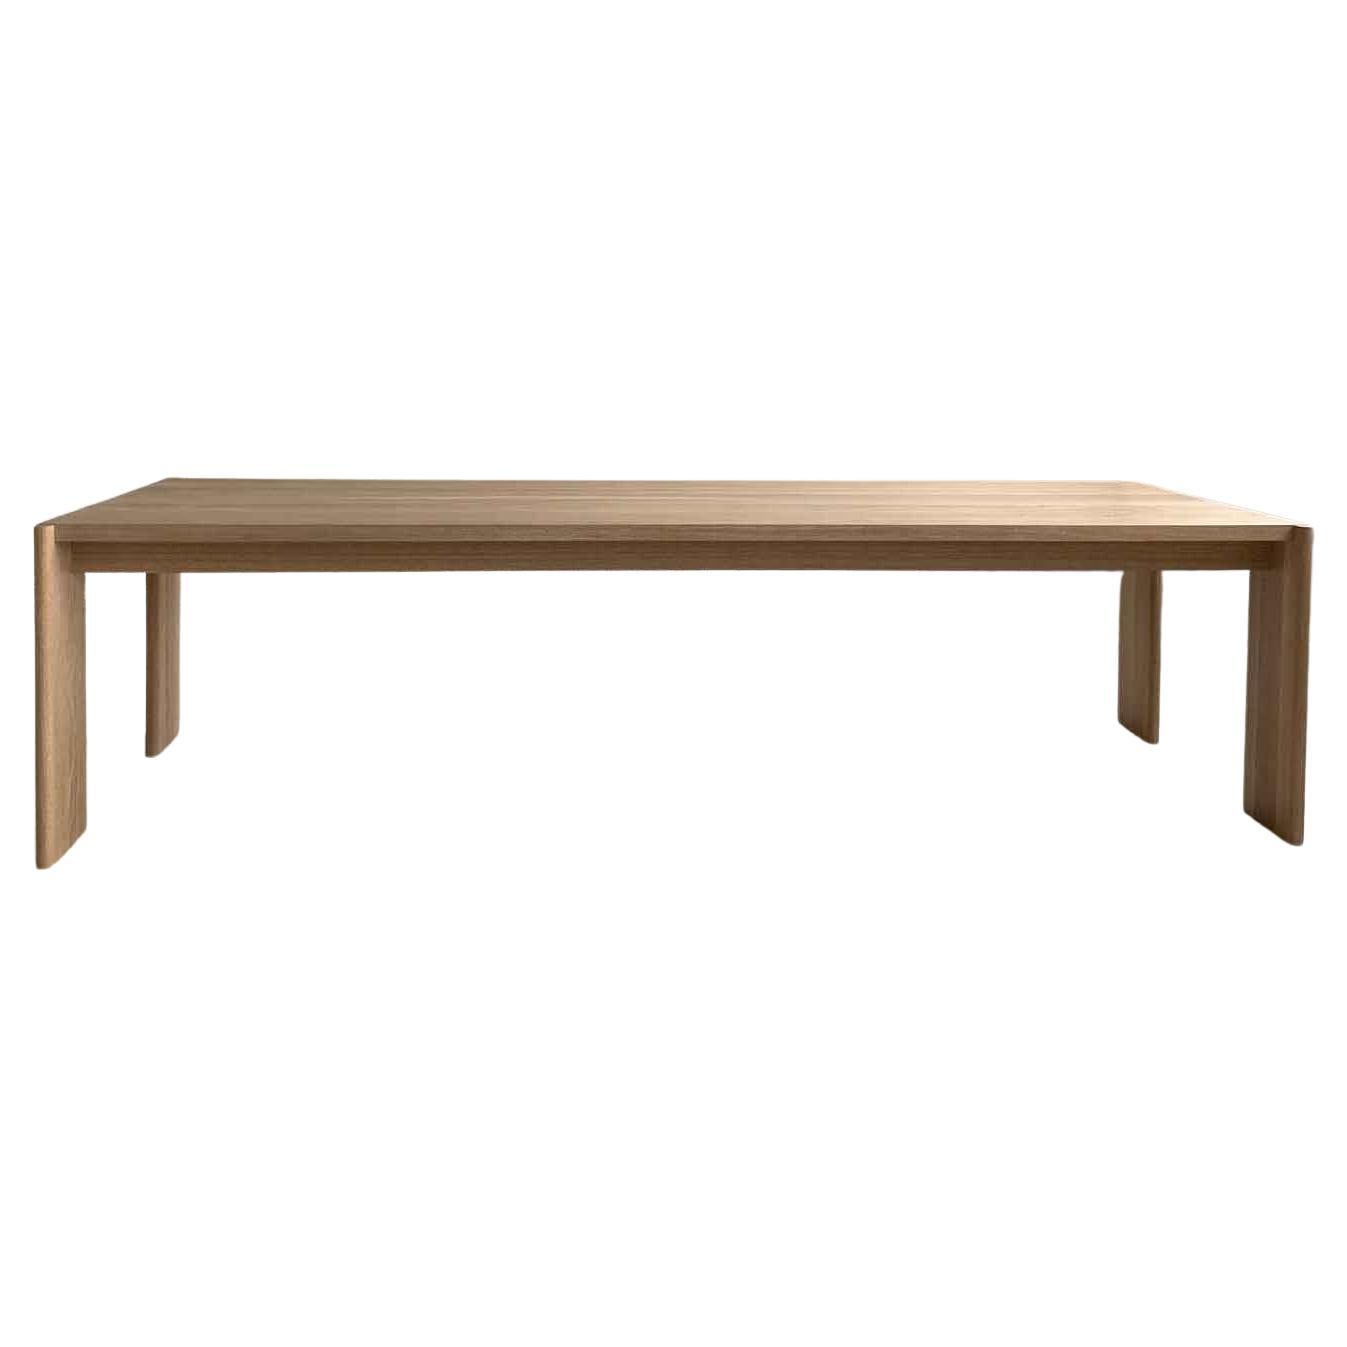 Handcrafted Curtis Dining Table in Solid White Oak 96"L by Mary Ratcliffe Studio